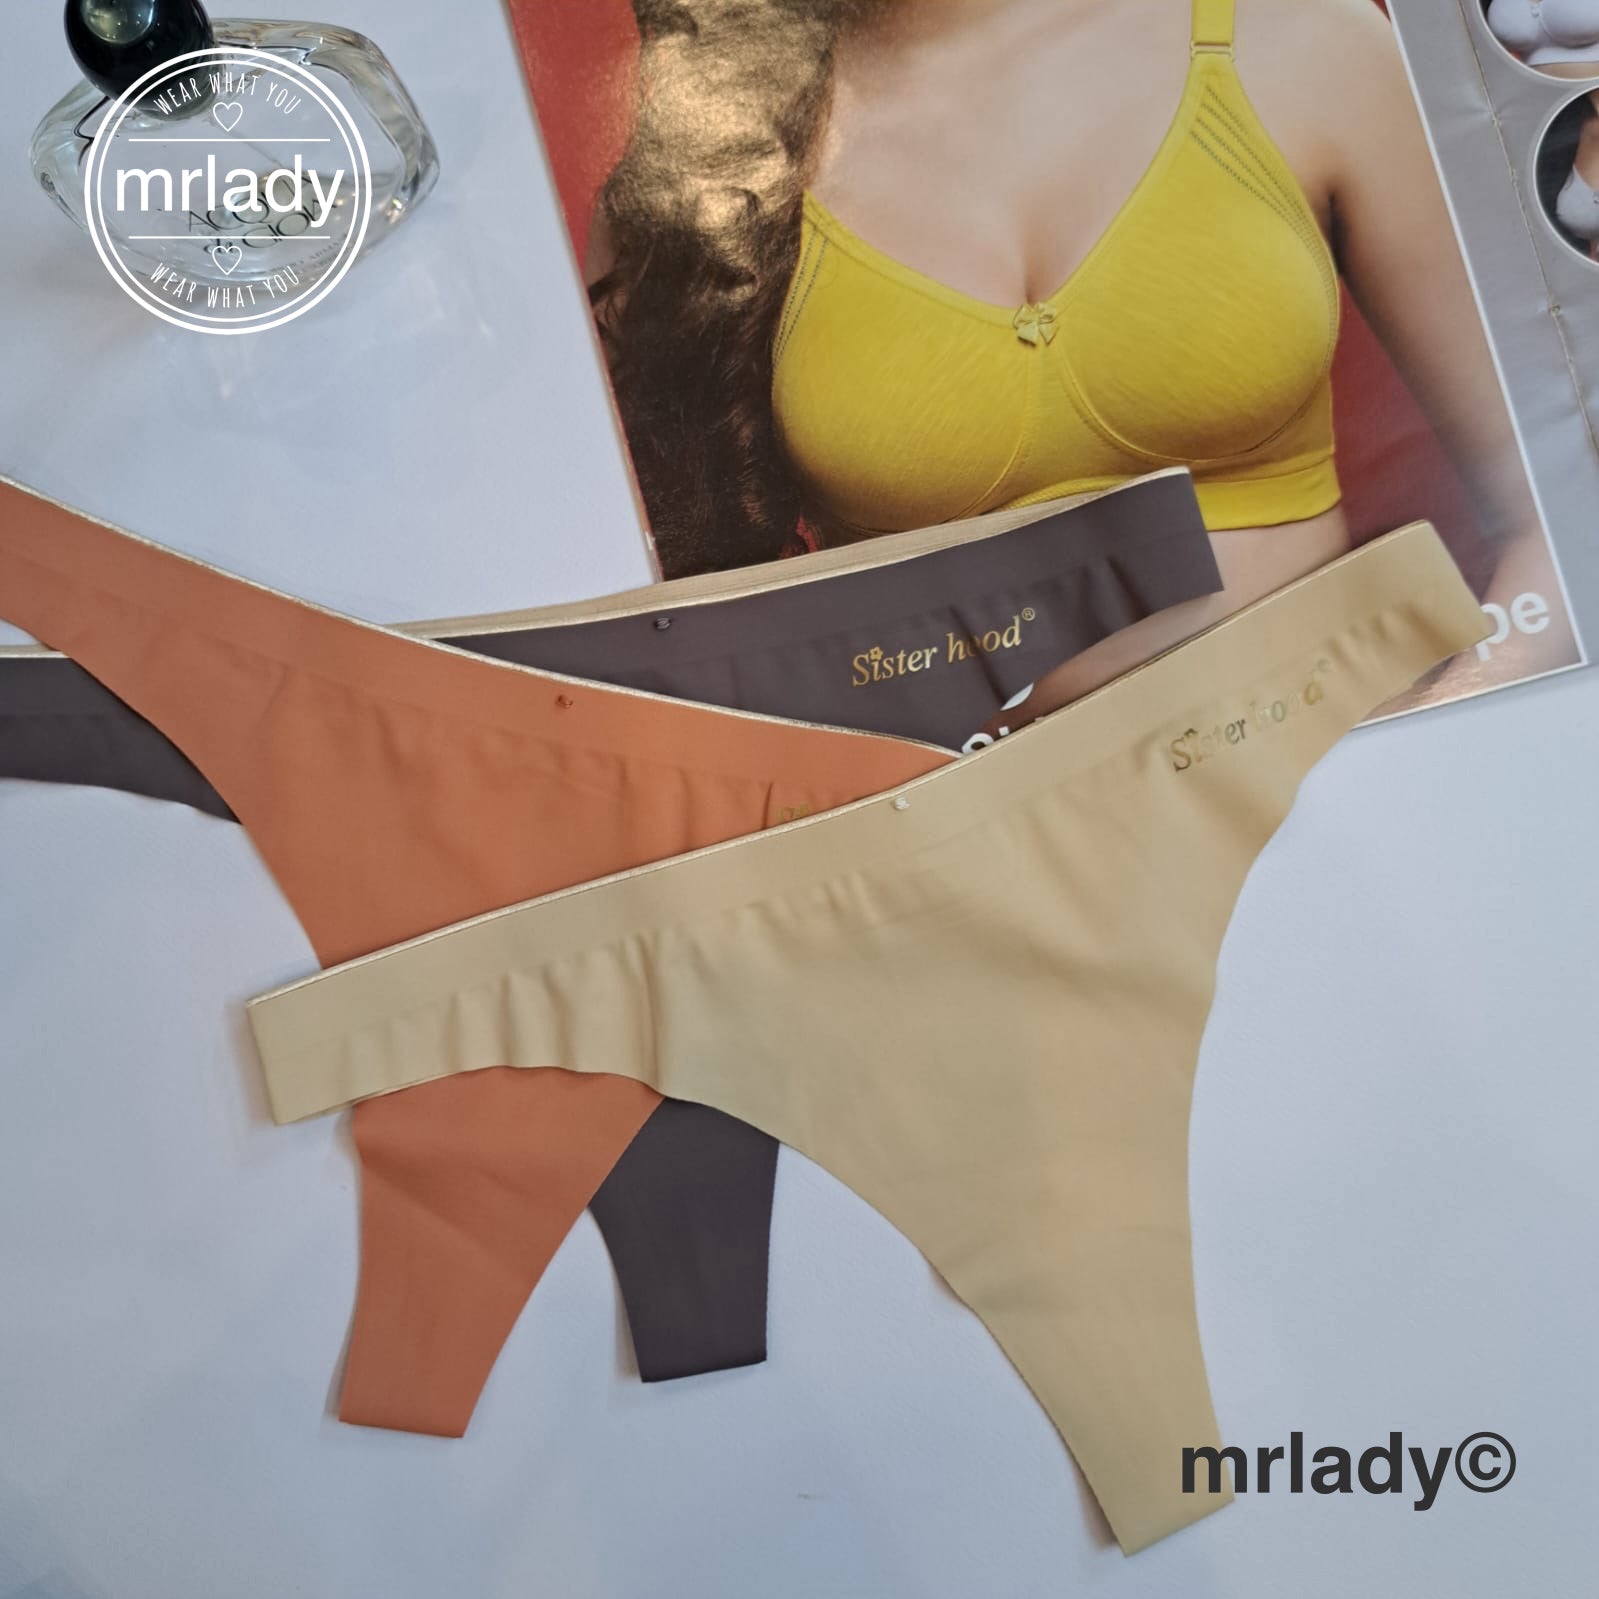 SUPER QUALITY THONG PANTY – mrlady - Lingerie Store